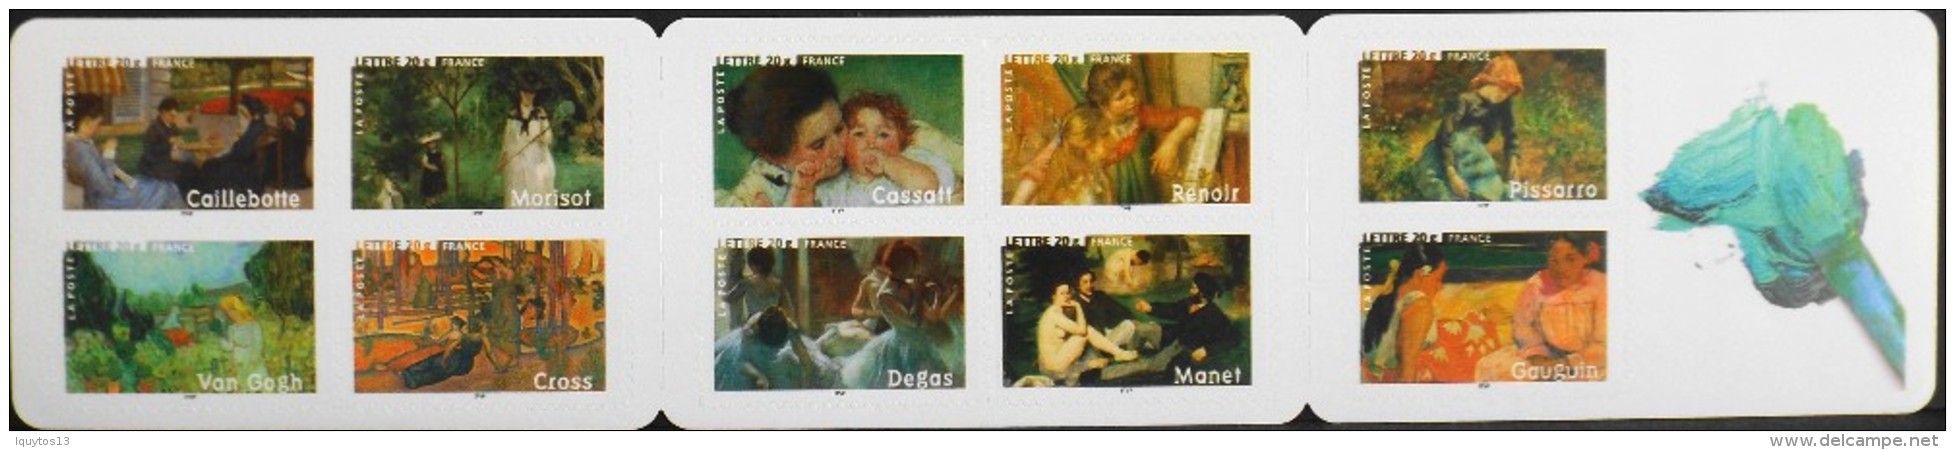 FRANCE CARNET 2006 - Les Impressionnistes - 10 TIMBRES Prioritaires  AUTOADHESIFS NEUFS** - Booklets